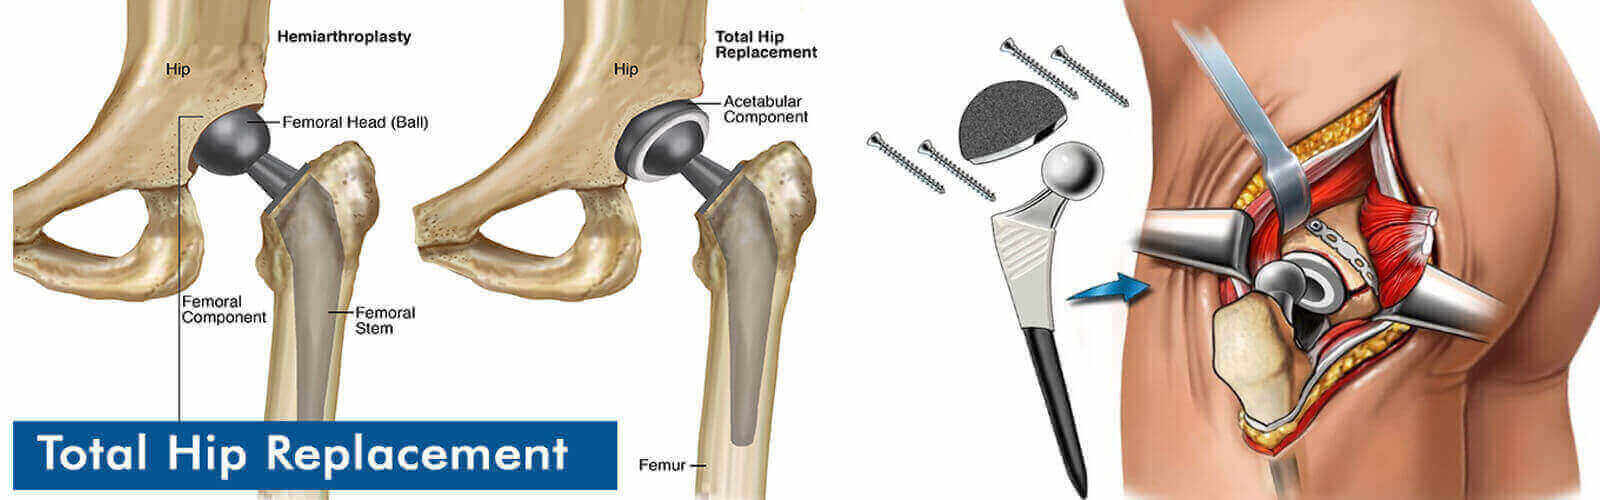 Hip Replacement Surgery Or Hip Resurfacing in India